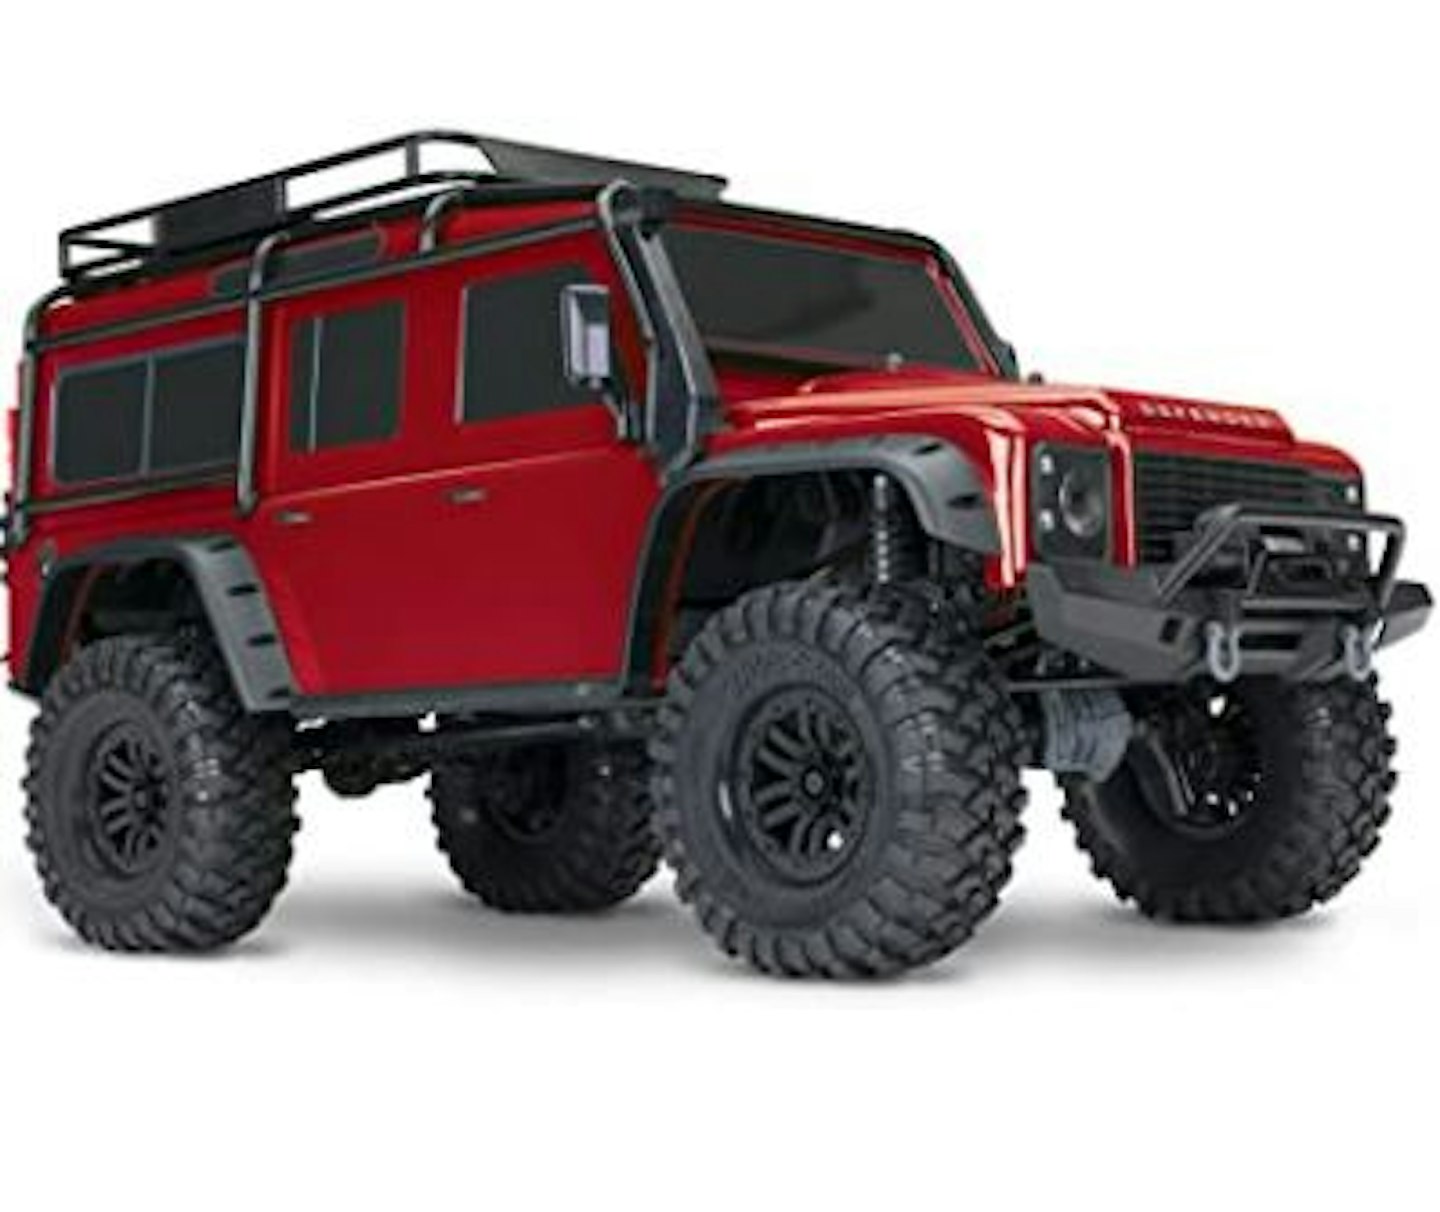 Traxxas TRX-4 Land Rover Defender, Red